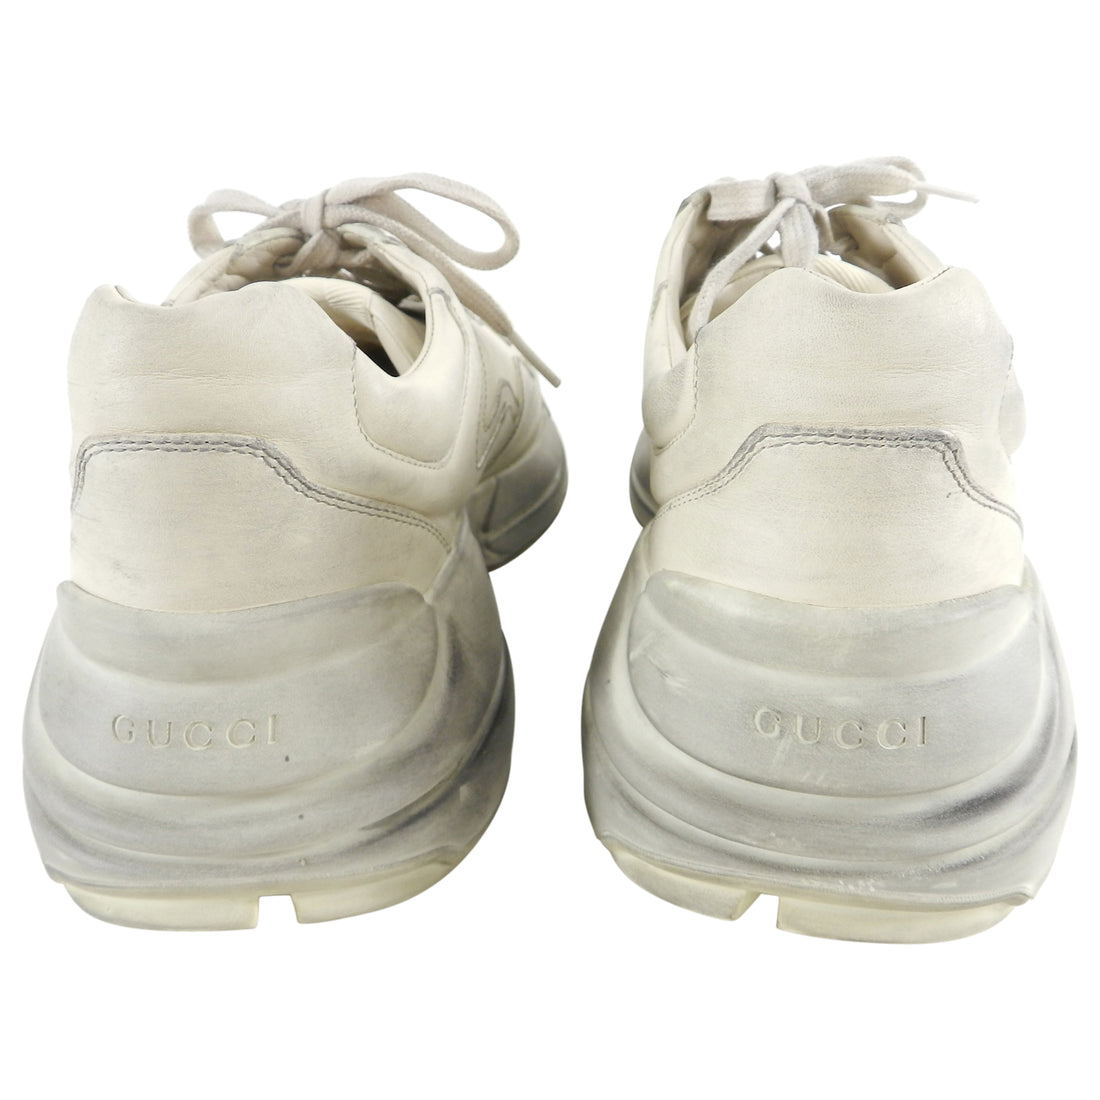 Gucci Distressed Leather Rhyton Sneakers - 11